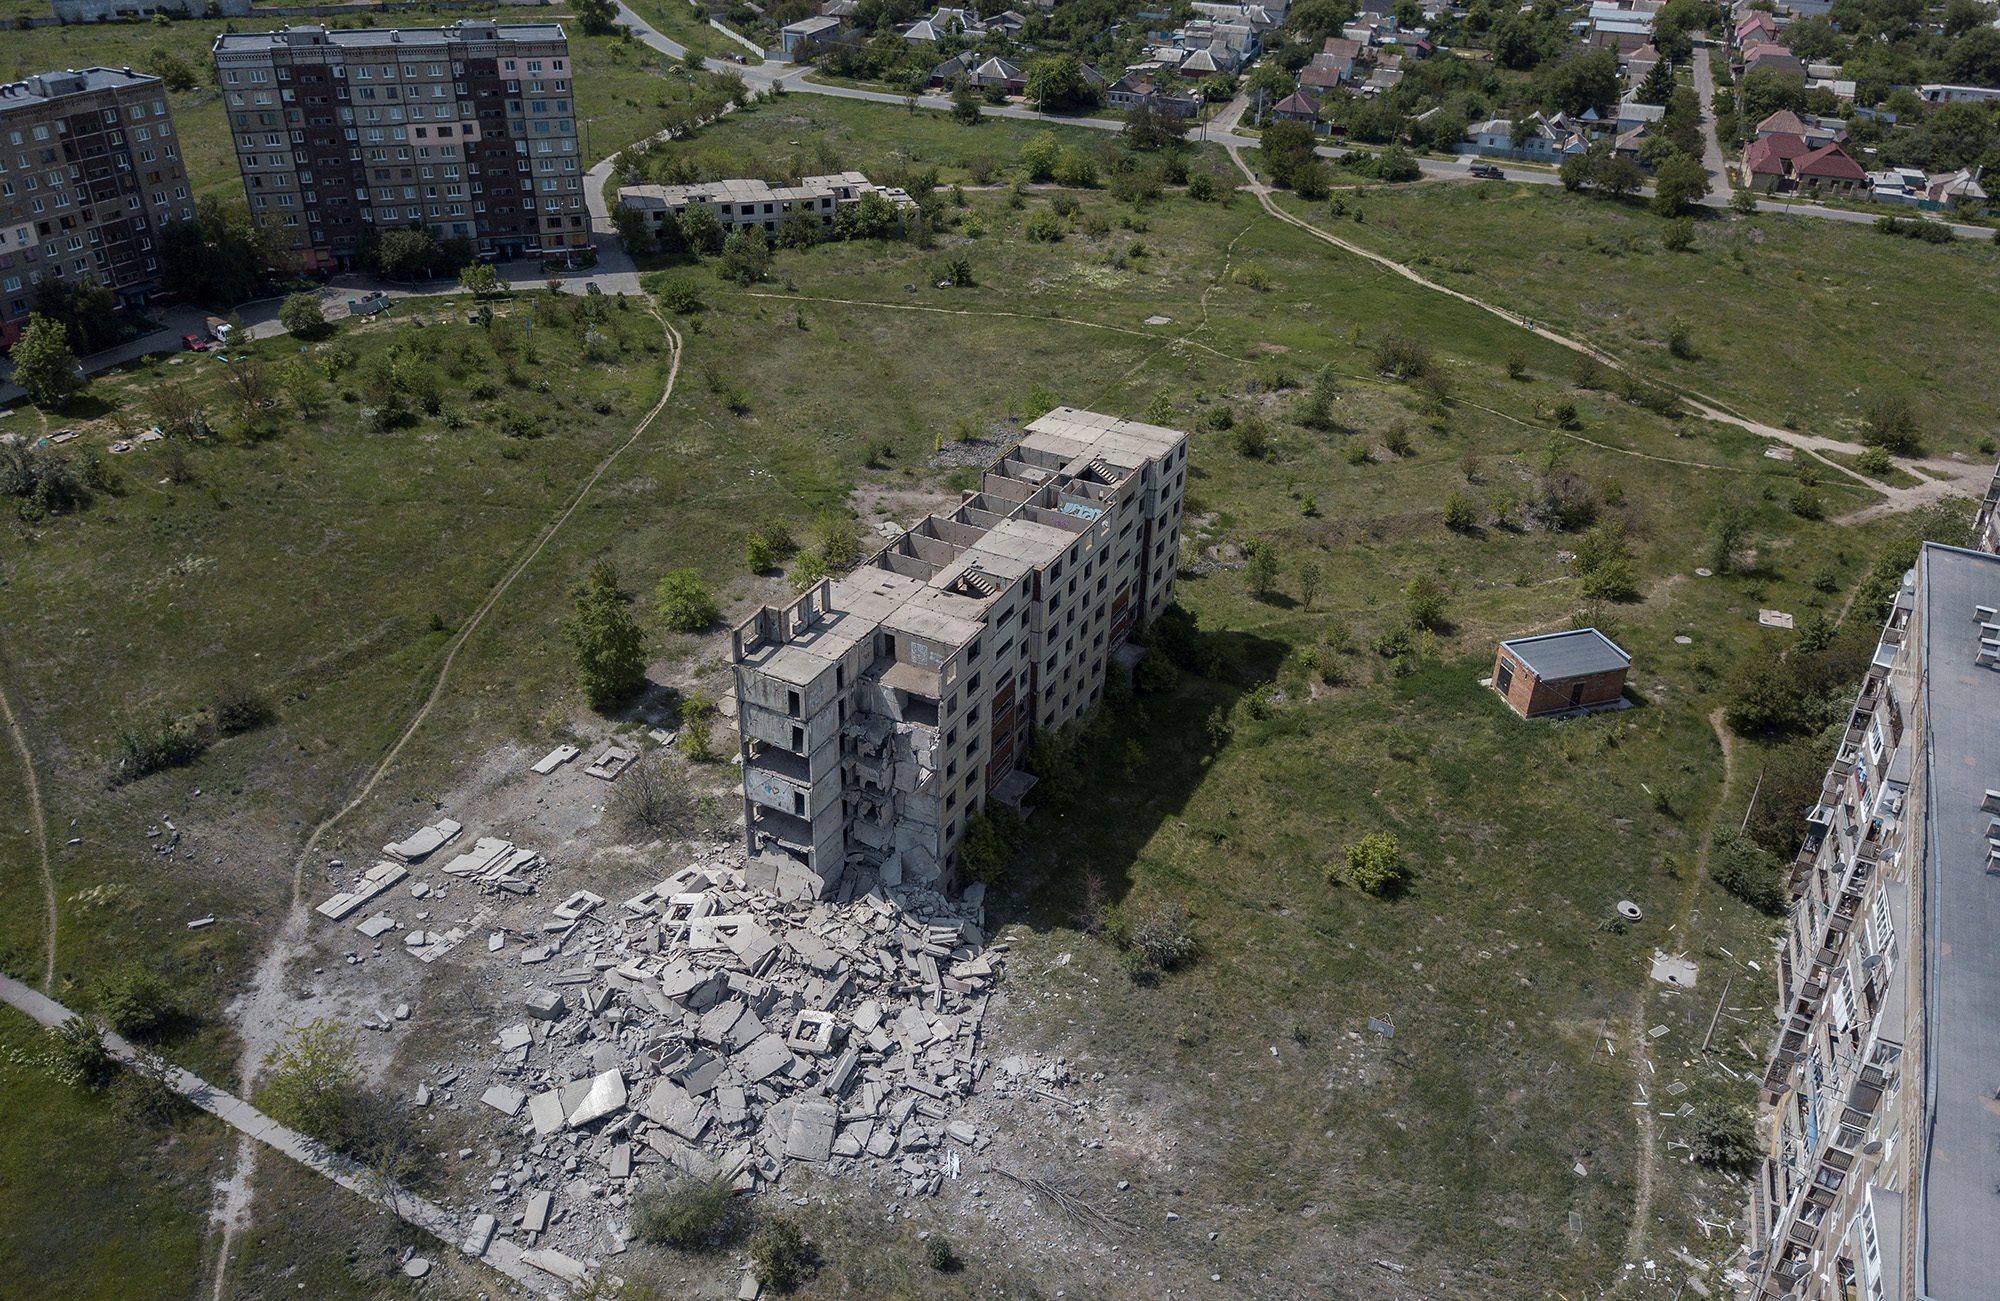 A building damaged in a missile attack in the city of Kramatorsk, Donetsk region, Ukraine, on May 26.